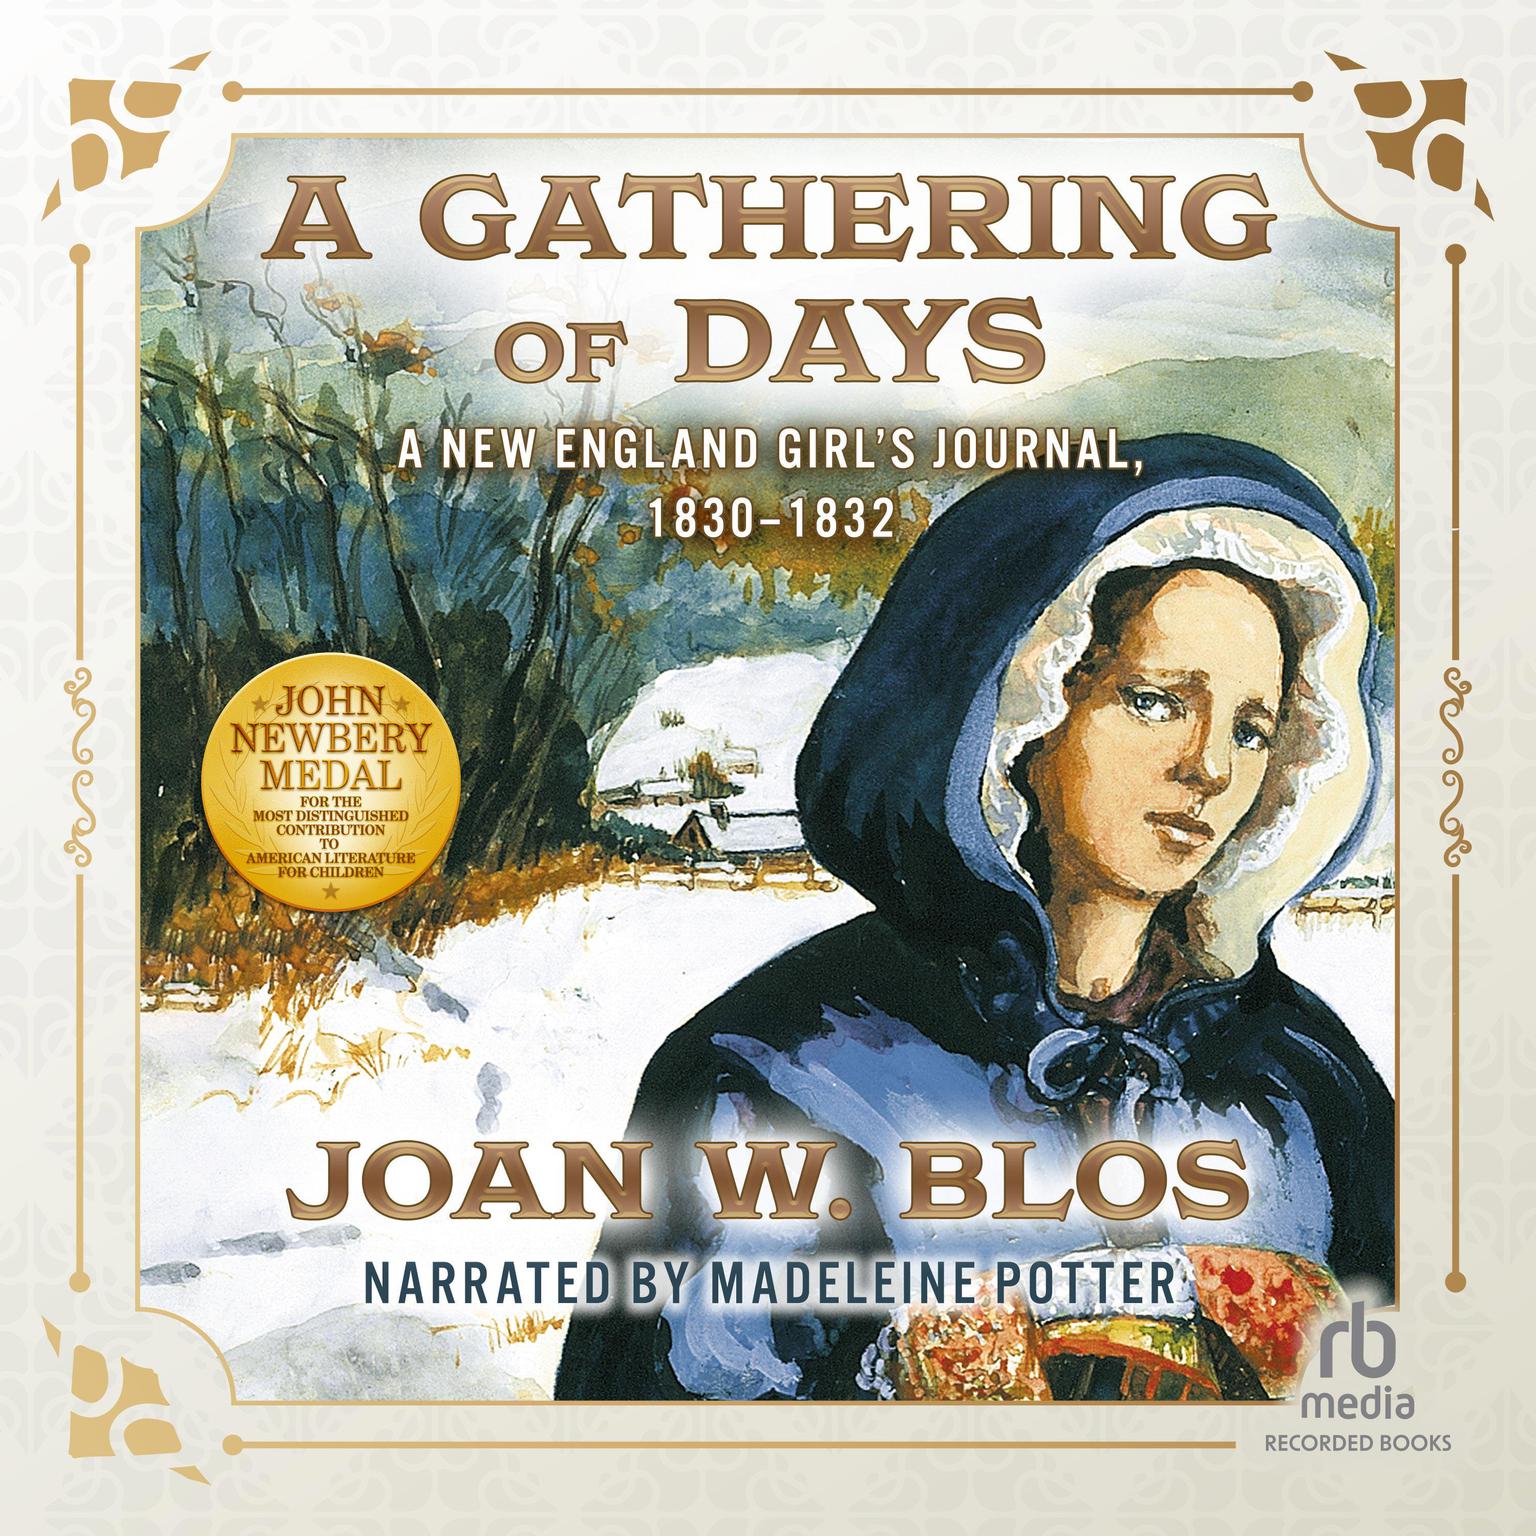 A Gathering of Days: A New England Girls Journal, 1830-1832 Audiobook, by Joan W. Blos